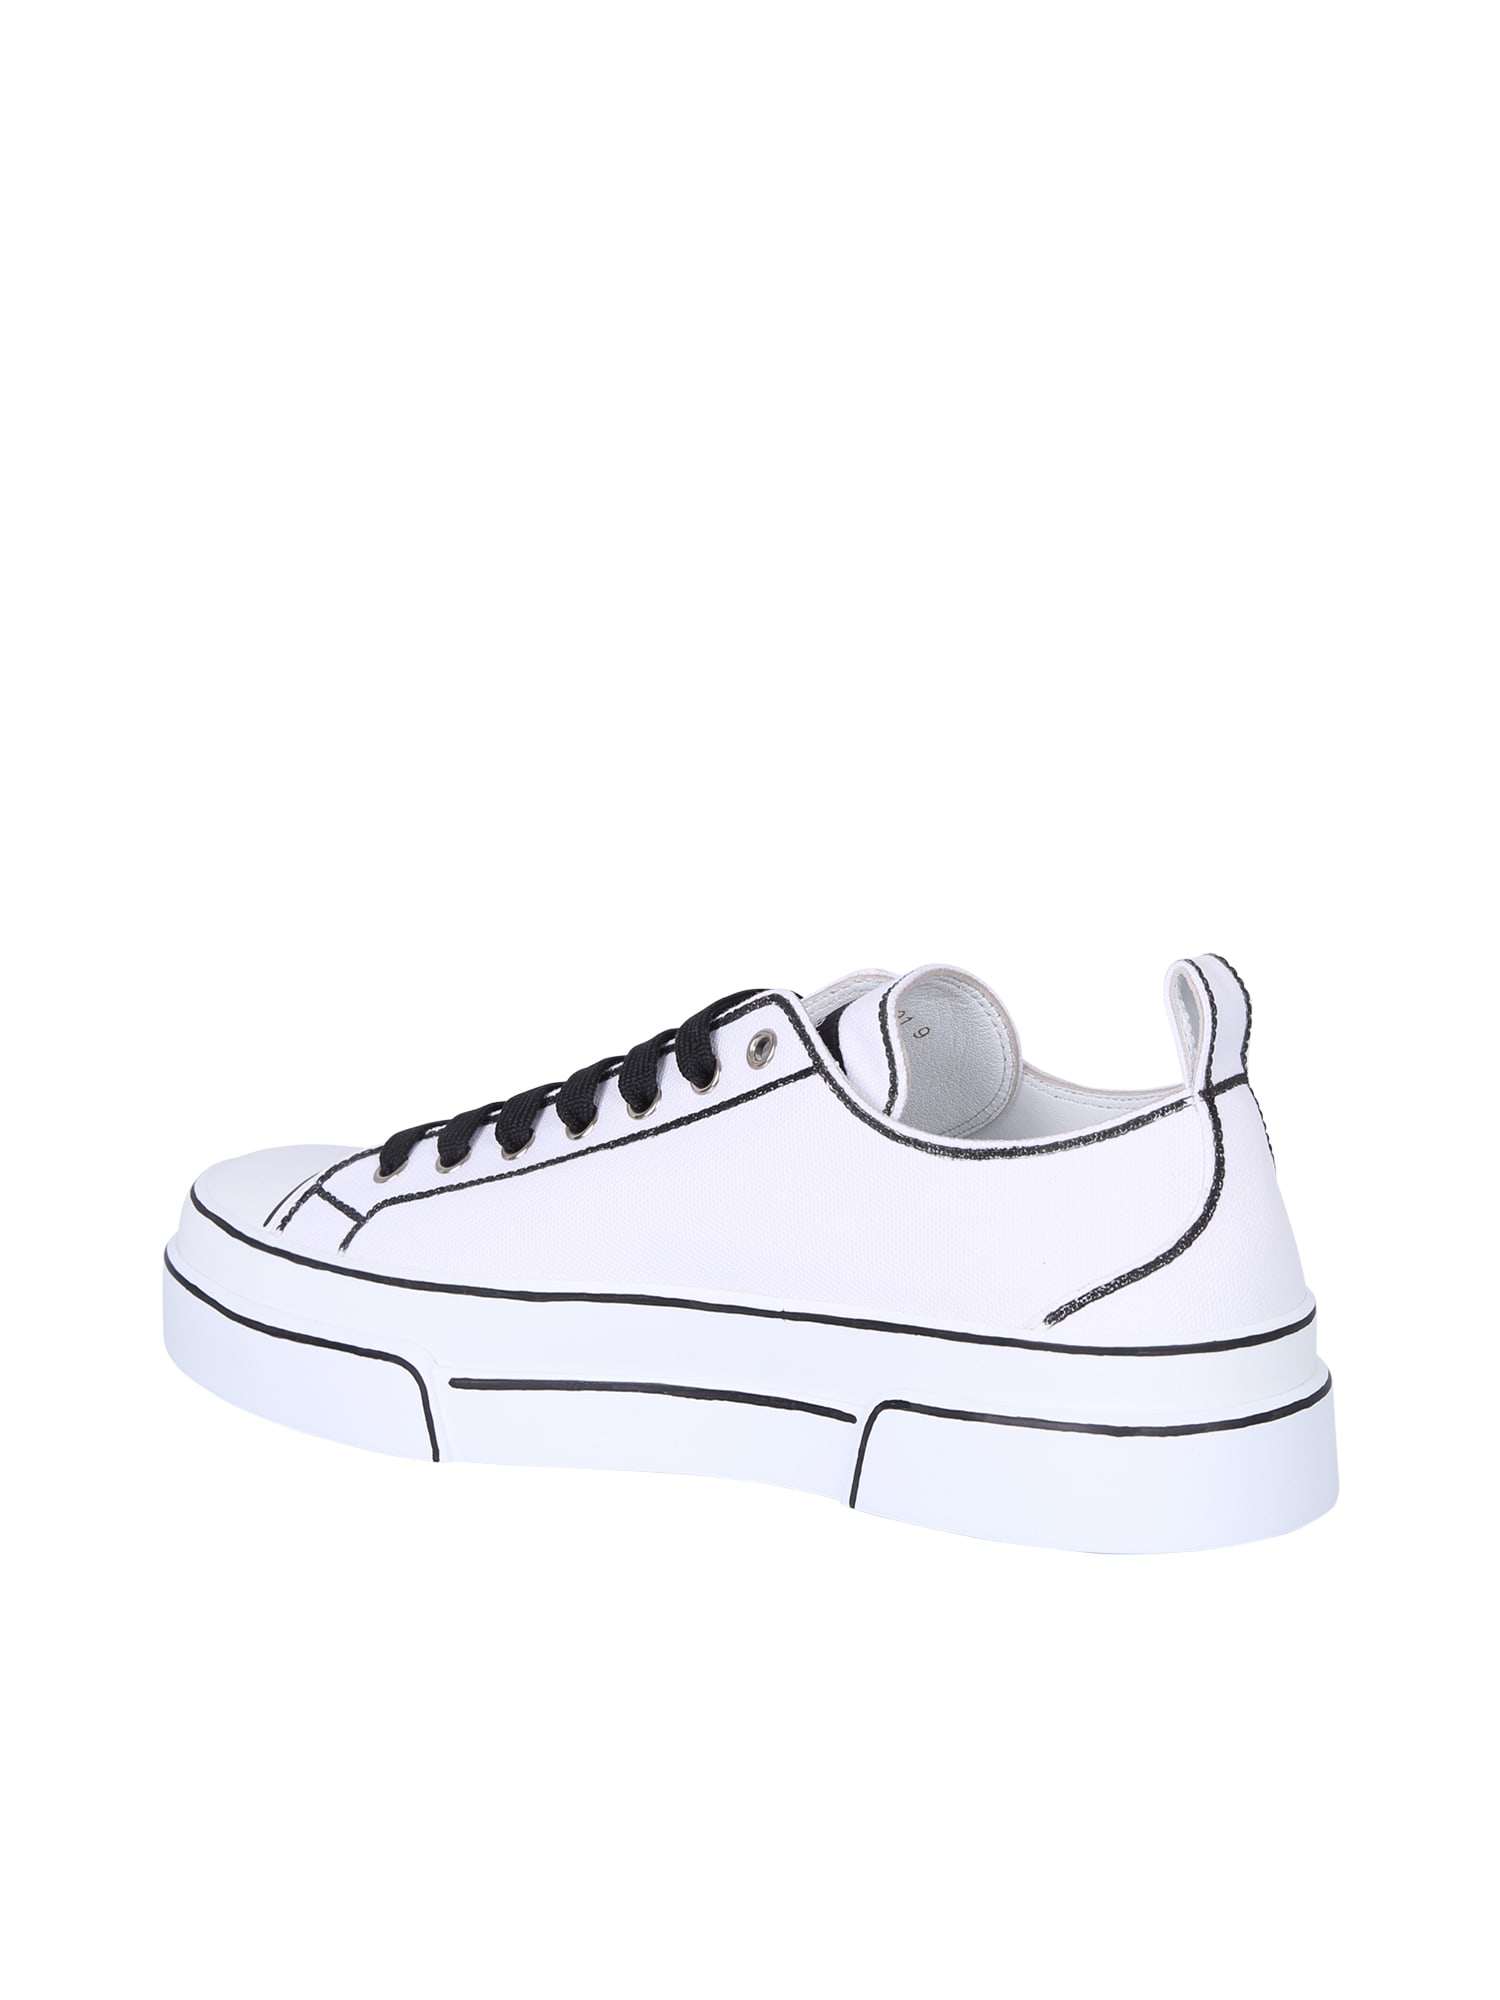 Dolce & Gabbana Hand-painted Canvas Portofino Light Sneakers In 